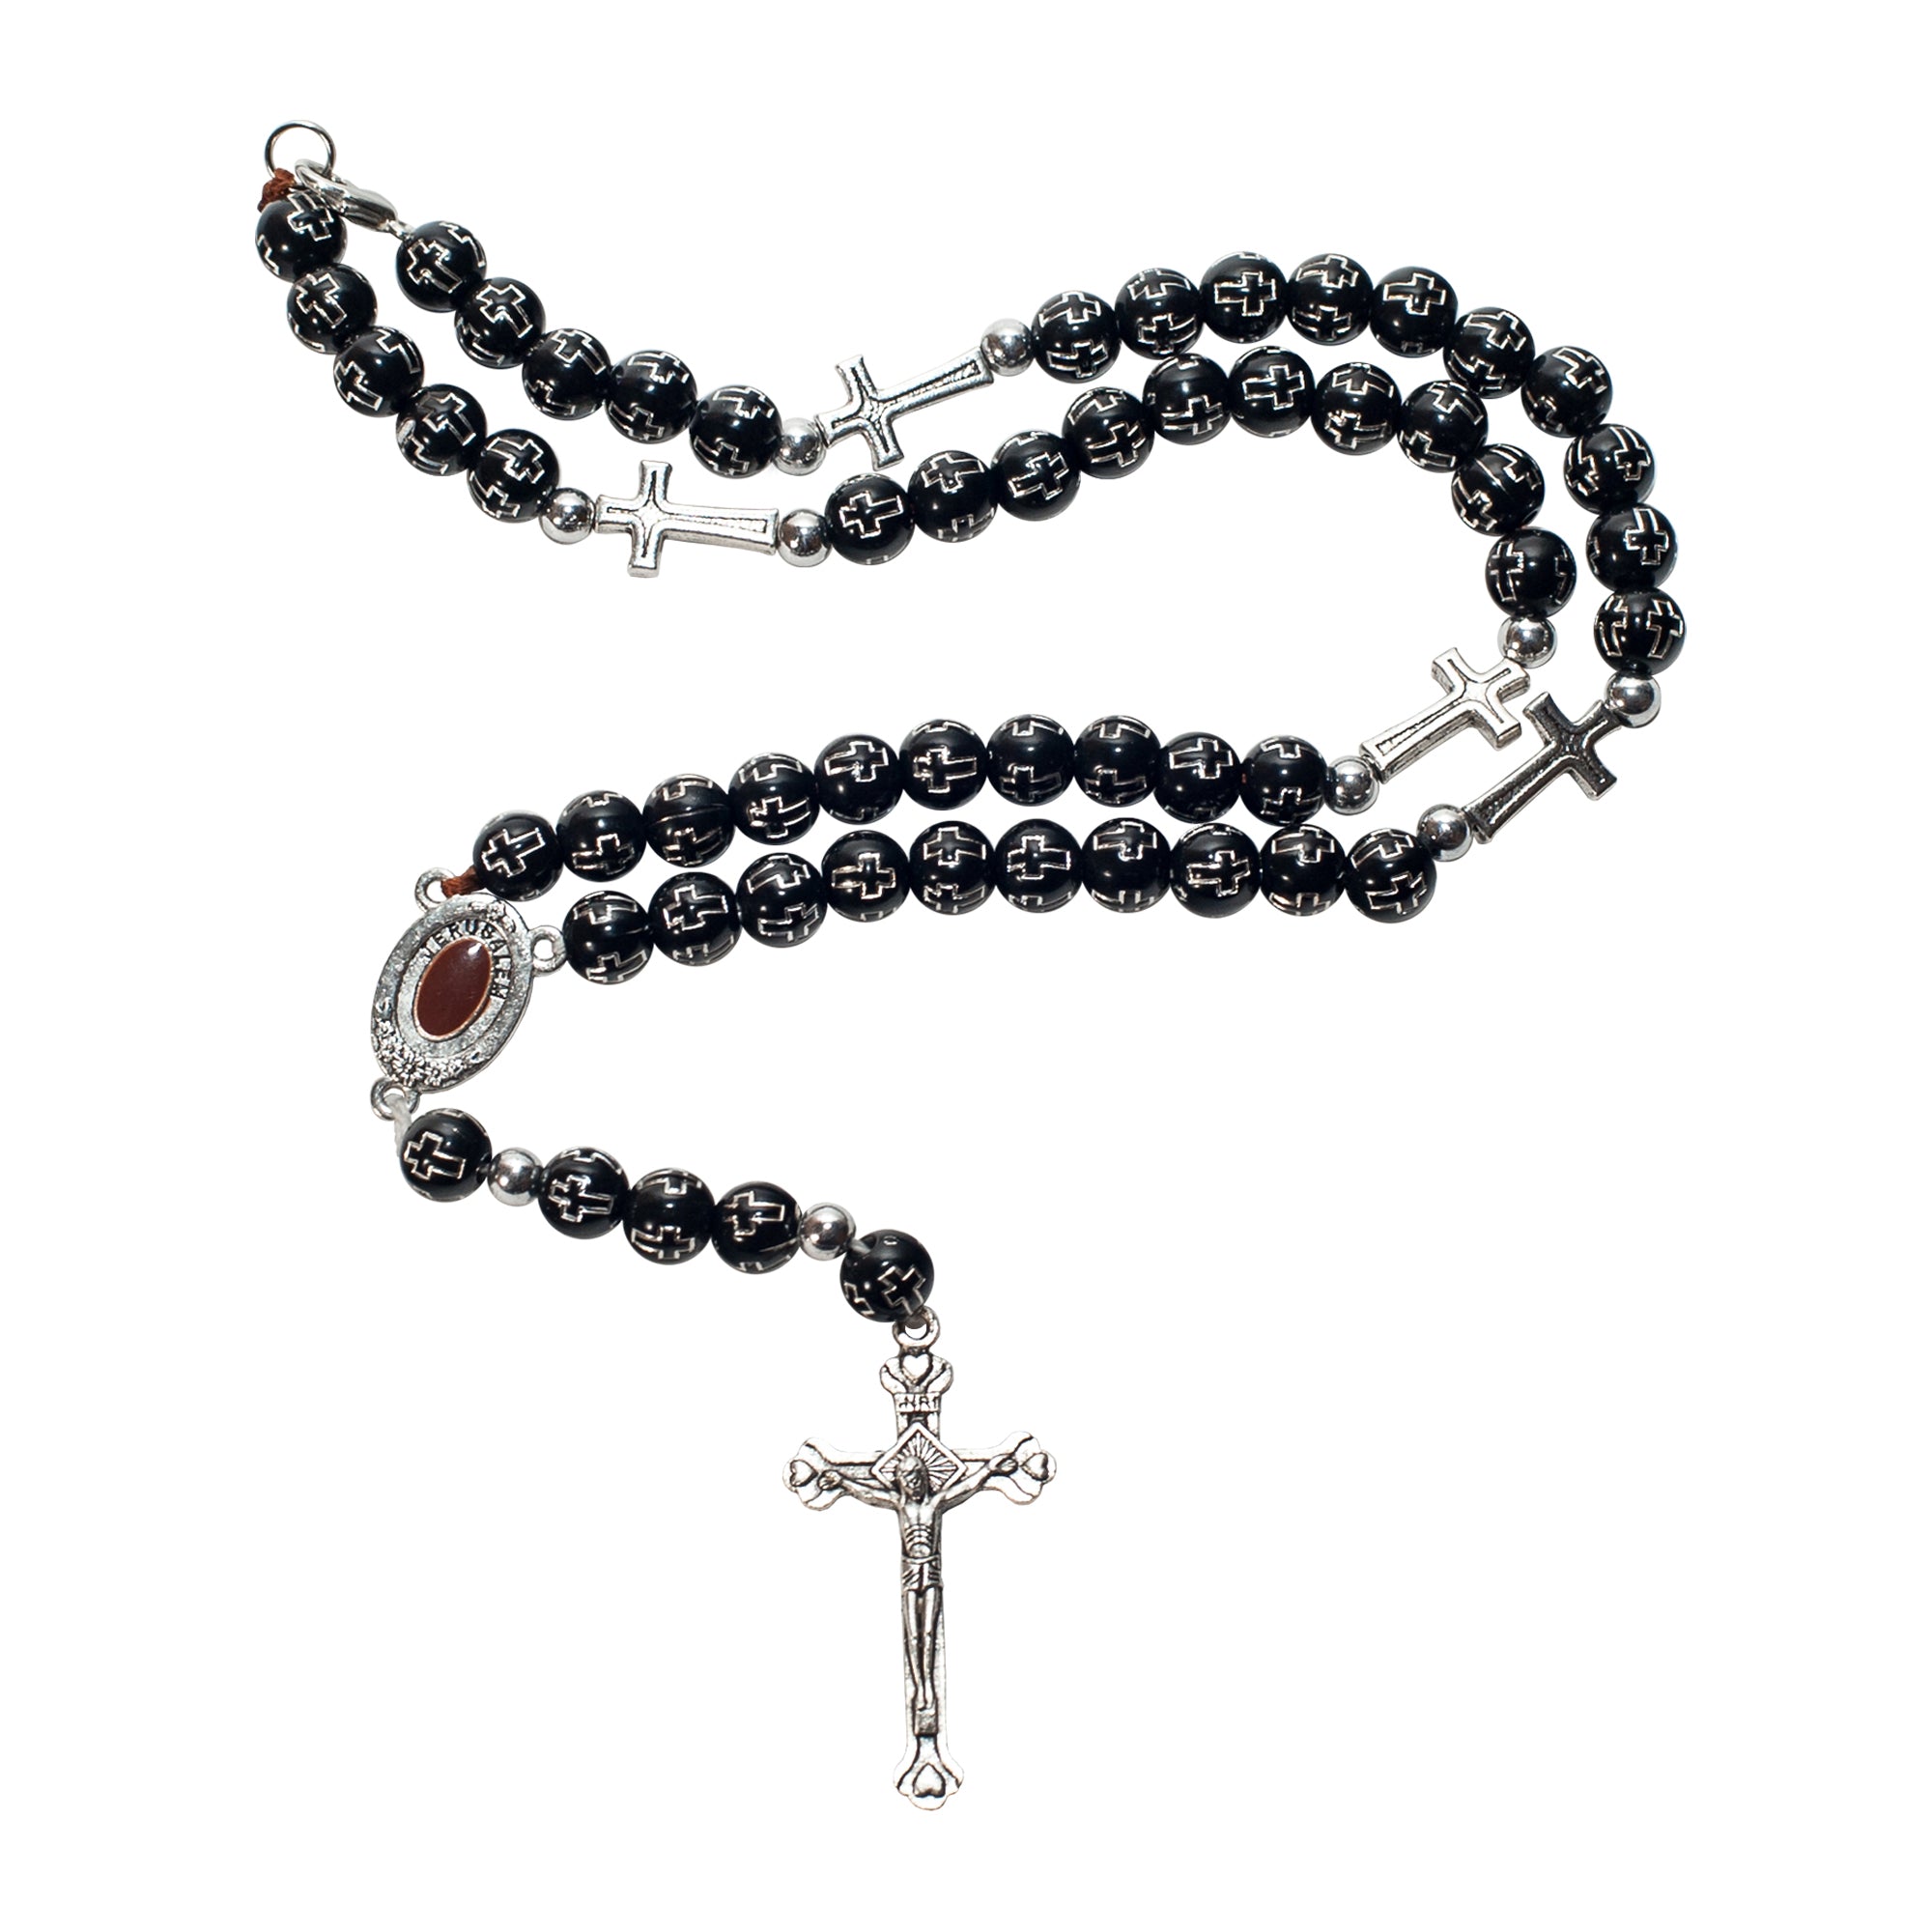 Black Oval Bead Rosary with a Saint Benedict Centrepiece | Heavens Blessings